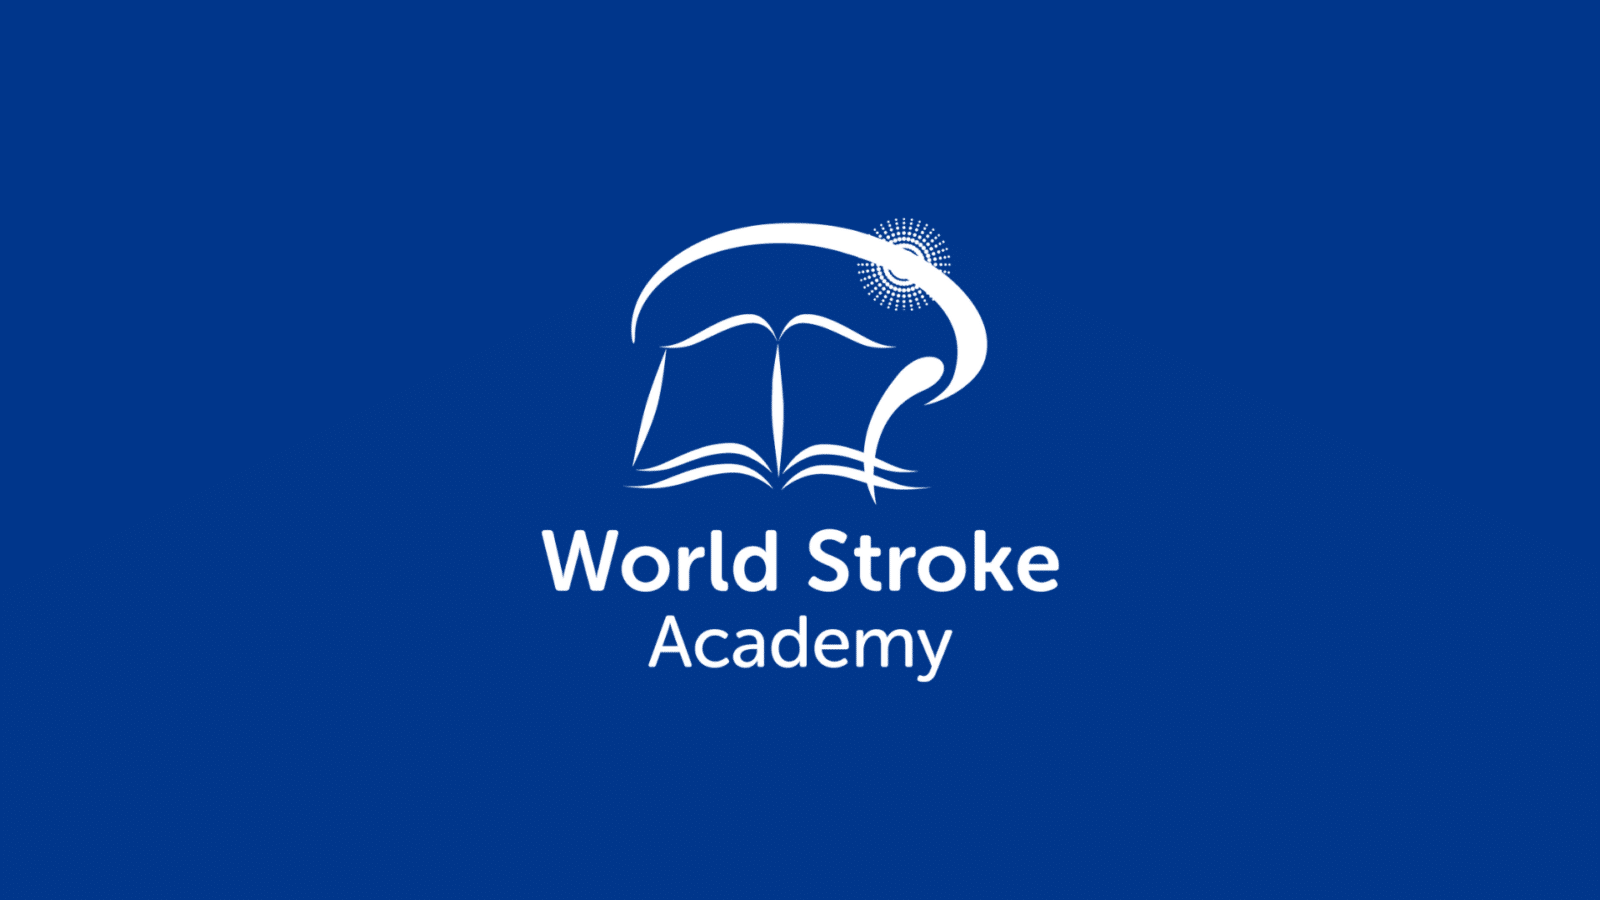 WSO webinar series: COVID-19 and stroke: a perspective from the Asia Pacific